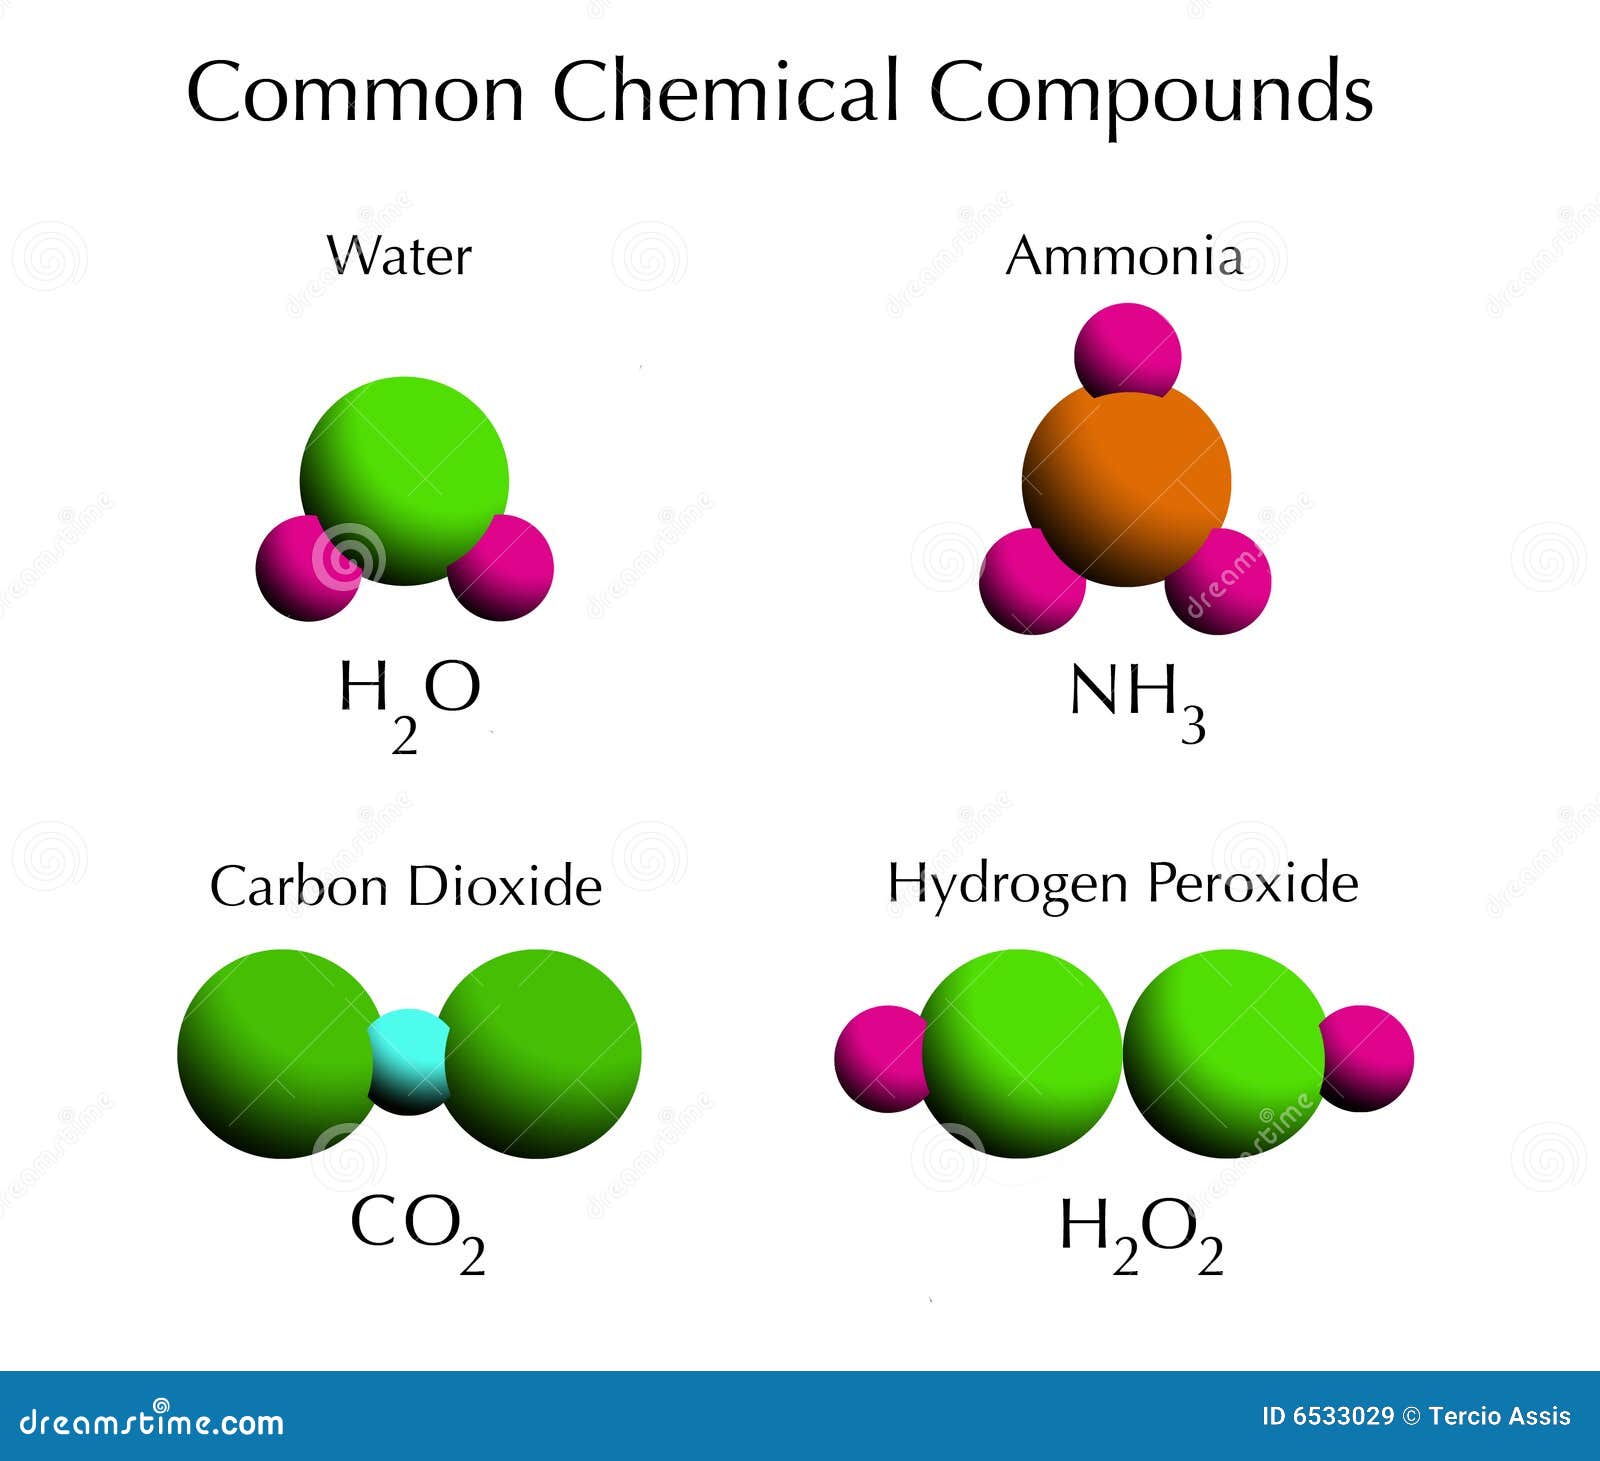 common-chemical-compounds-royalty-free-stock-images-image-6533029